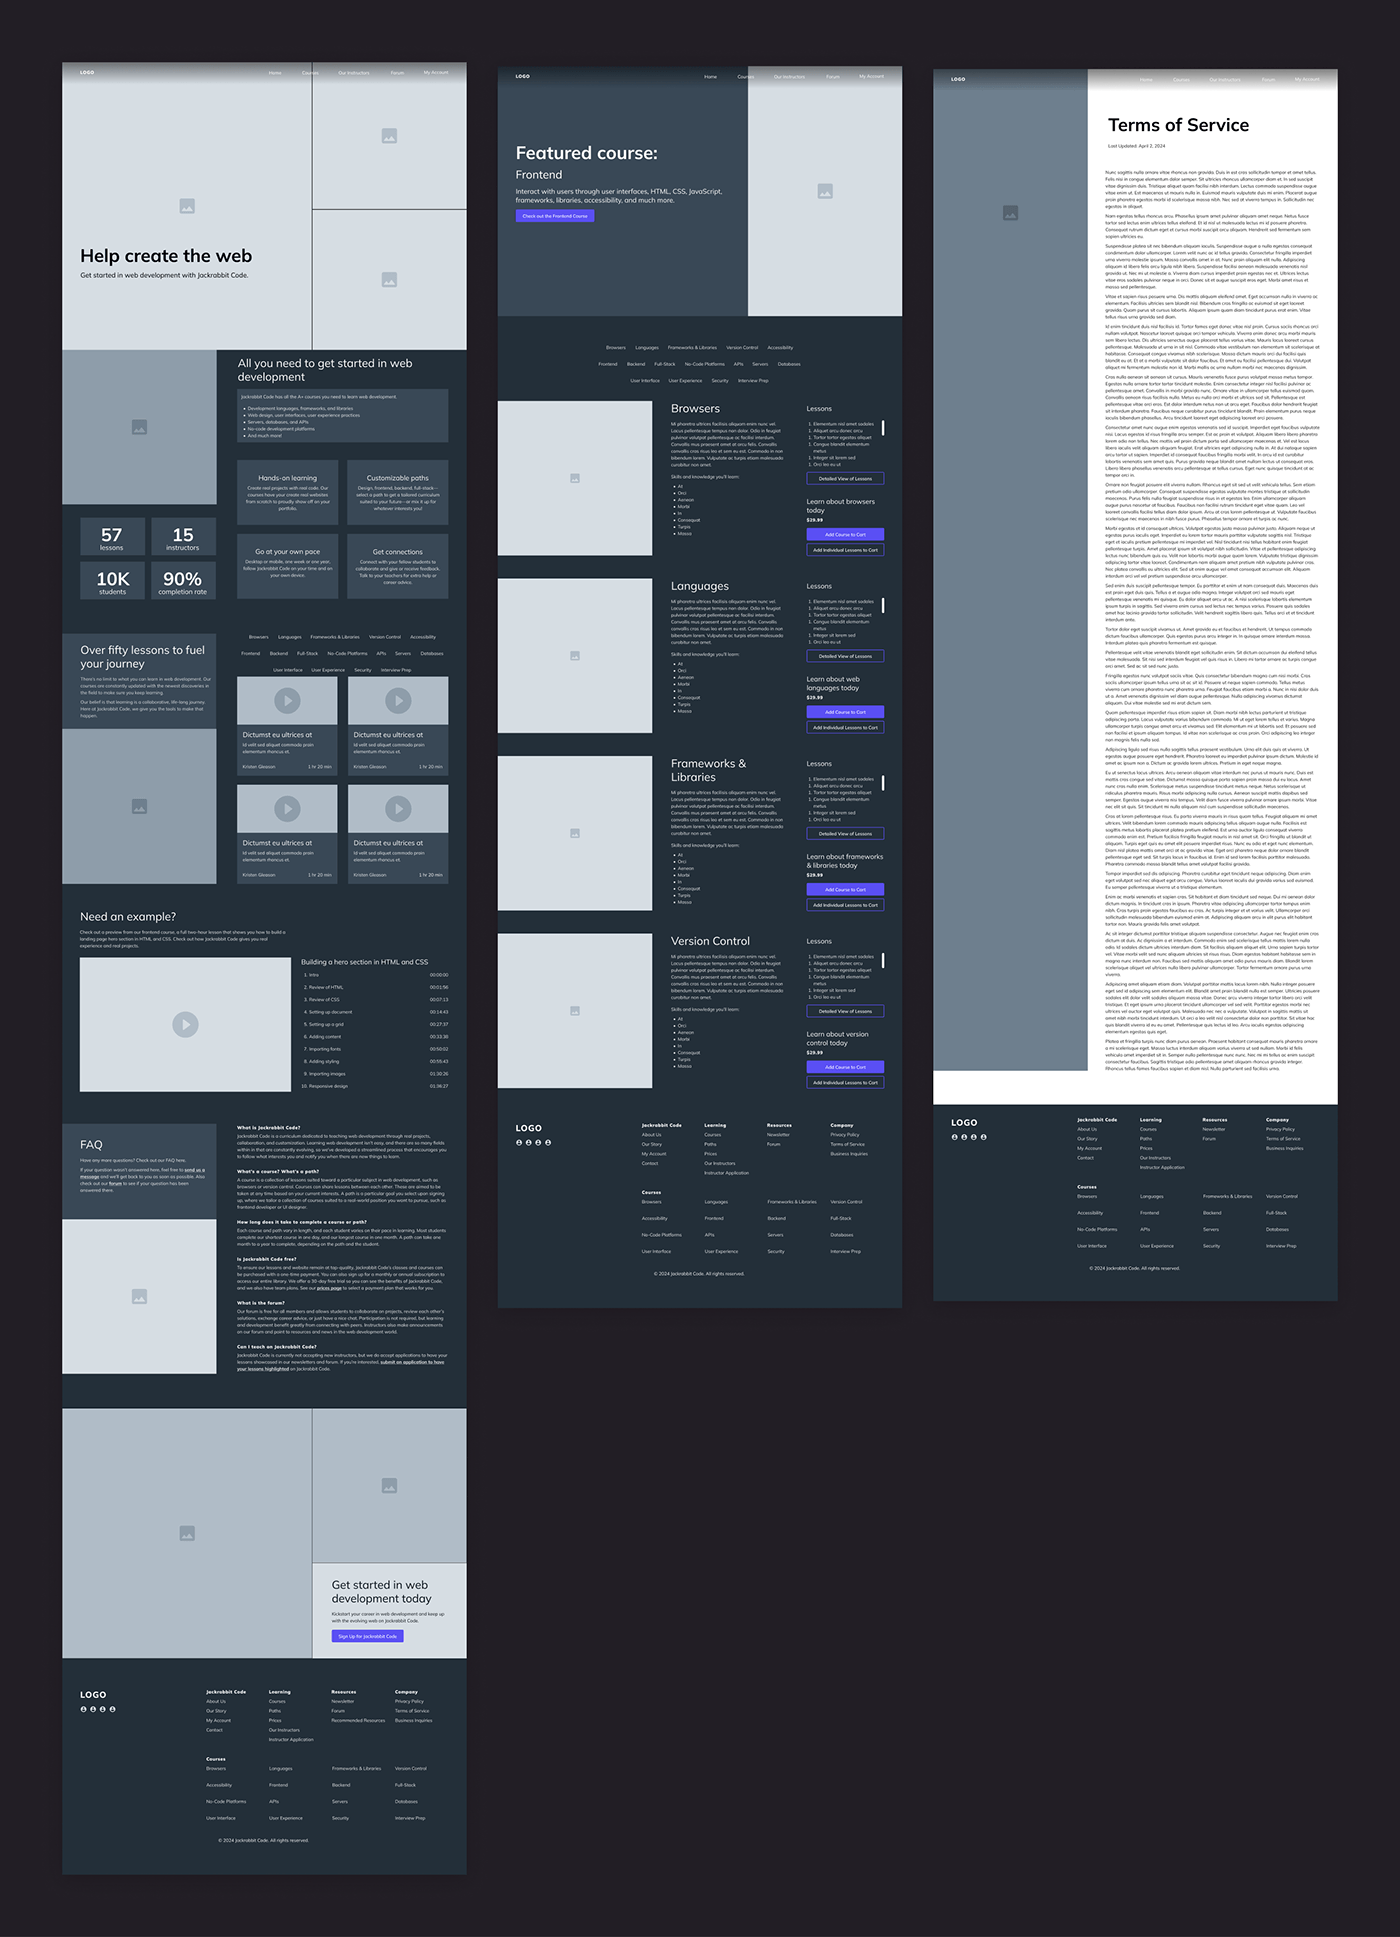 Wireframes of the desktop design, showing the landing page, courses page, and terms of service page